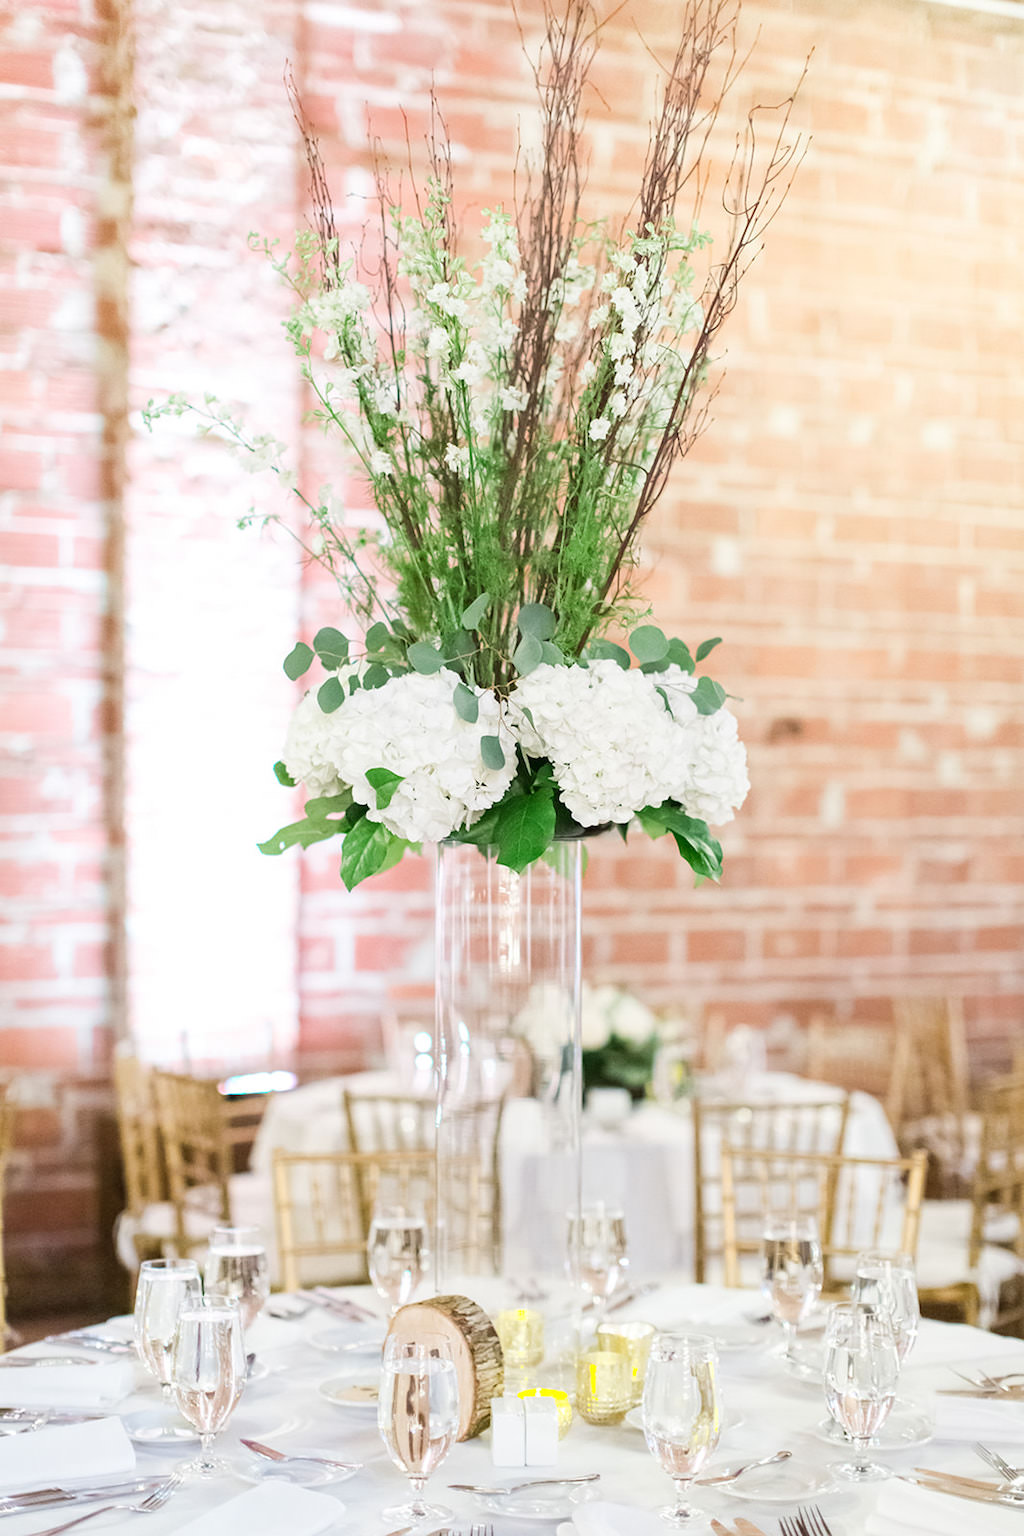 Rustic Chic Wedding Decor, White Hydrangeas, Greenery and Texture, Natural Element Wood Table Number, Gold Chiavari Chairs, Against Exposed Red Brick Wall | Florida Historic Wedding Venue NOVA 535 | Downtown St. Pete Wedding Photographers Shauna and Jordon Photography